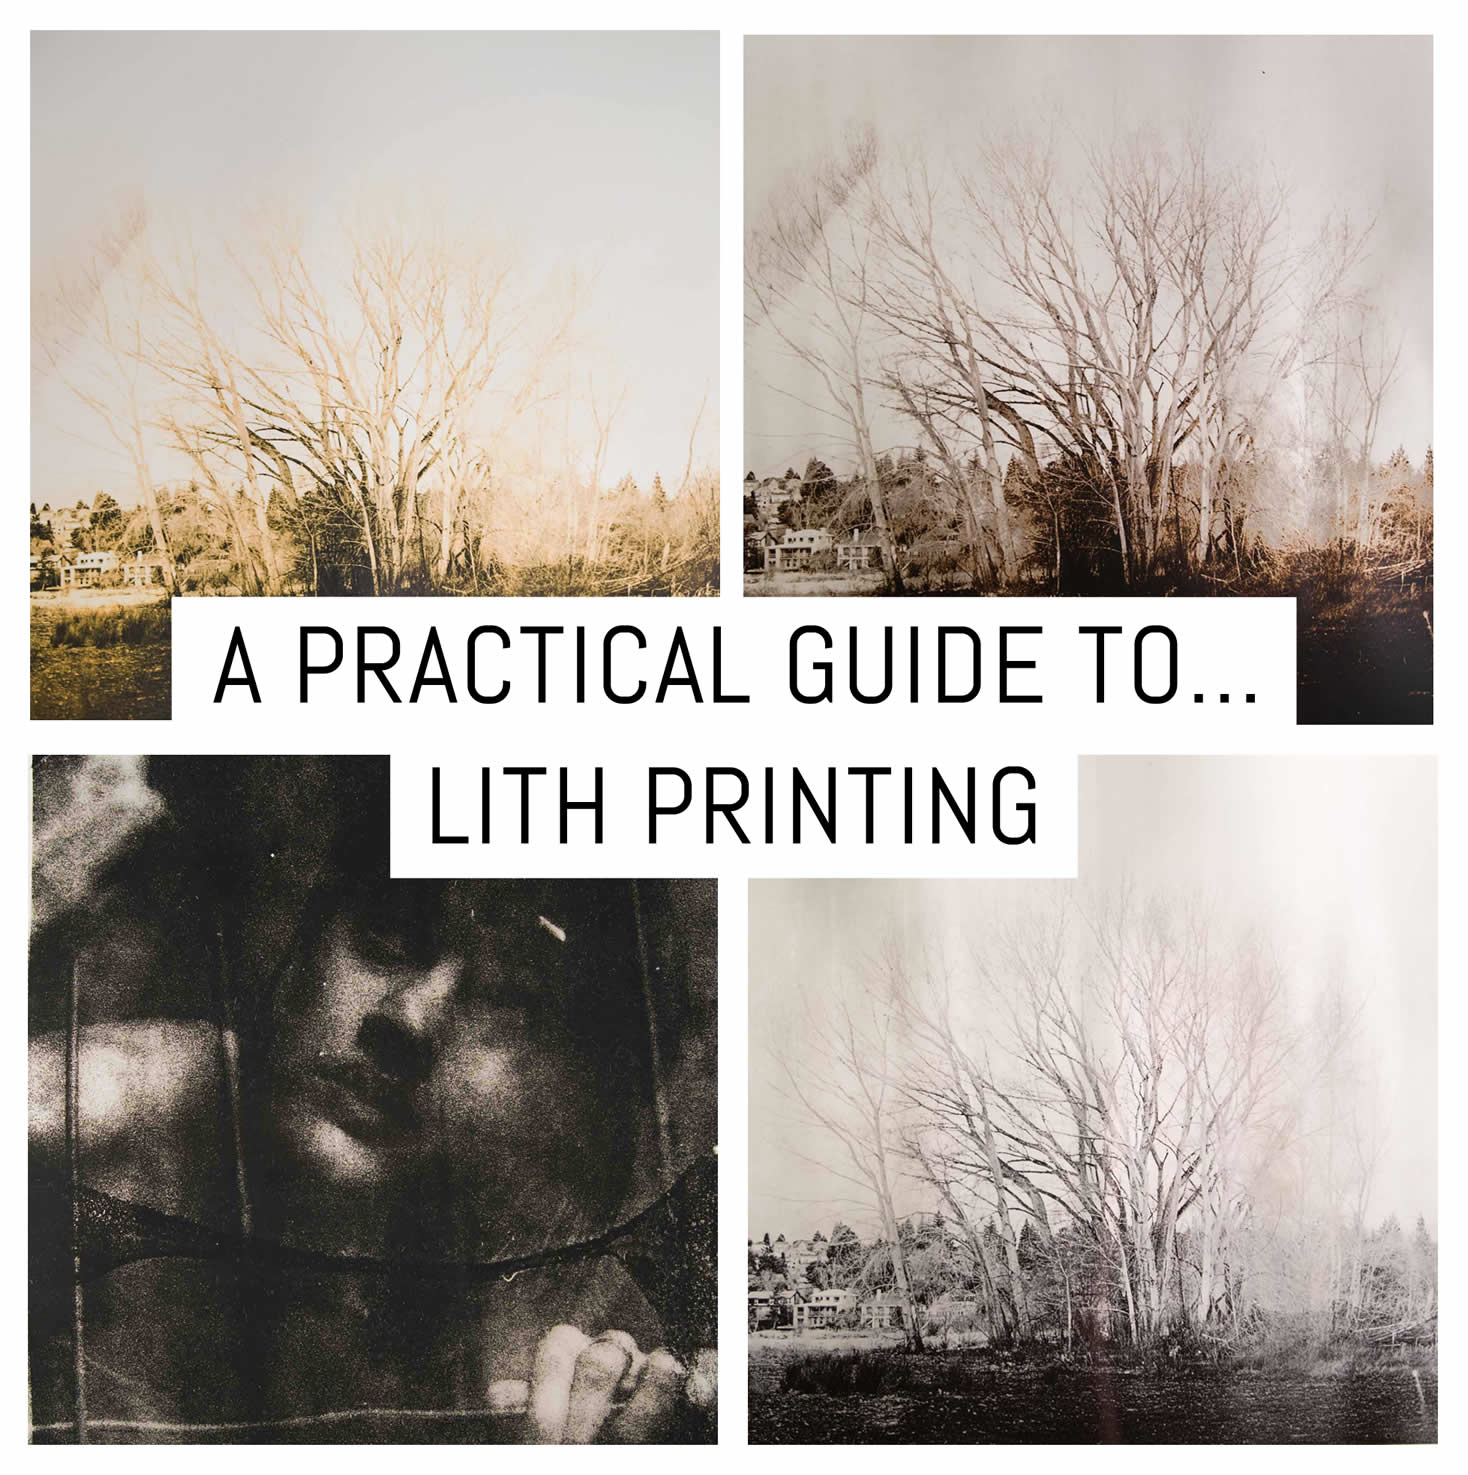 A practical guide to… Lith printing